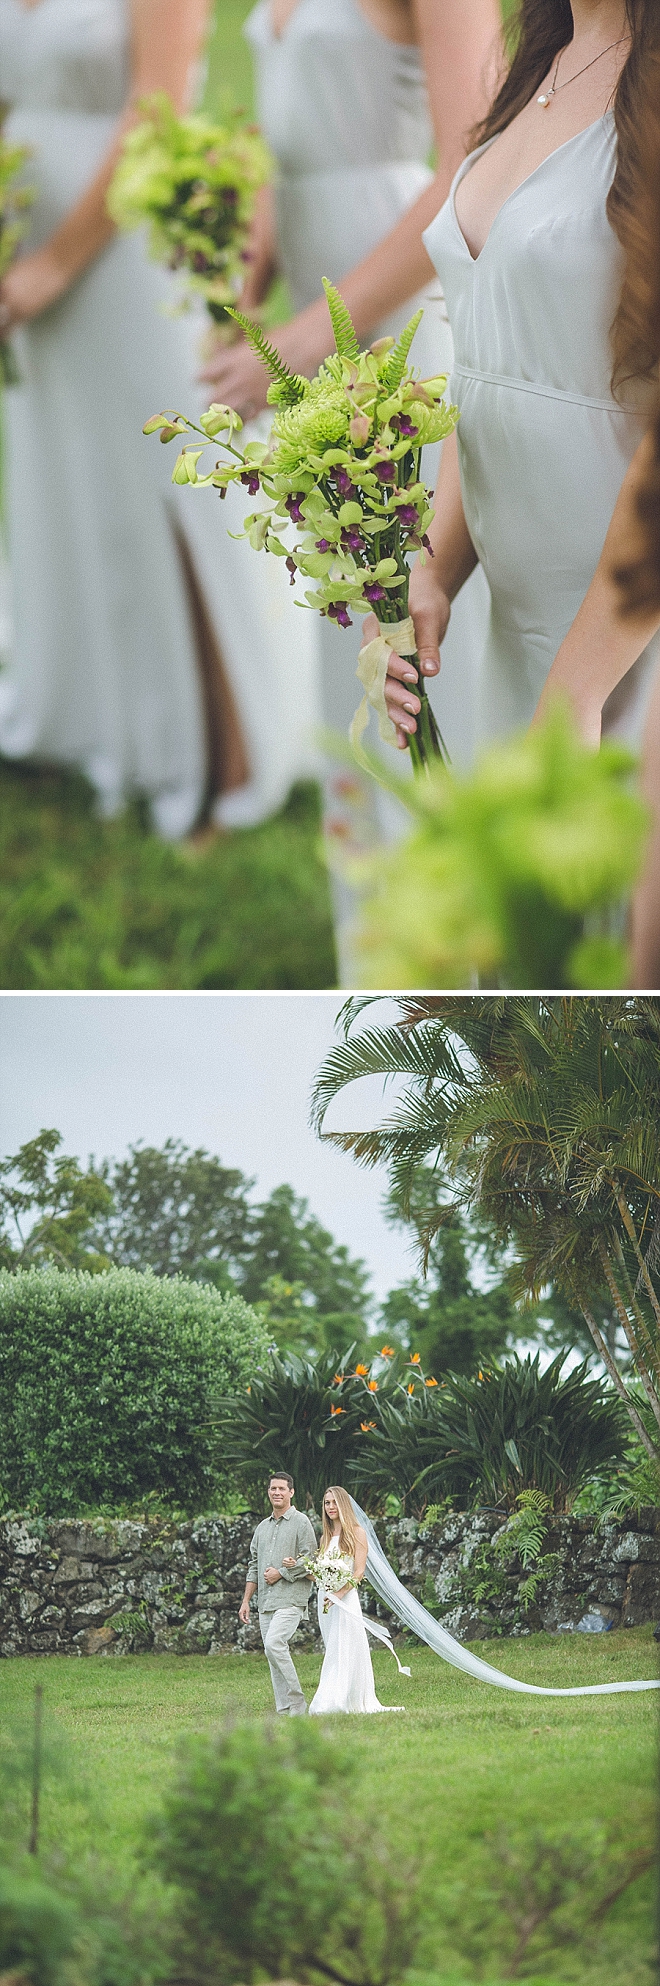 We're swooning over this stunning outdoor ceremony in Maui!